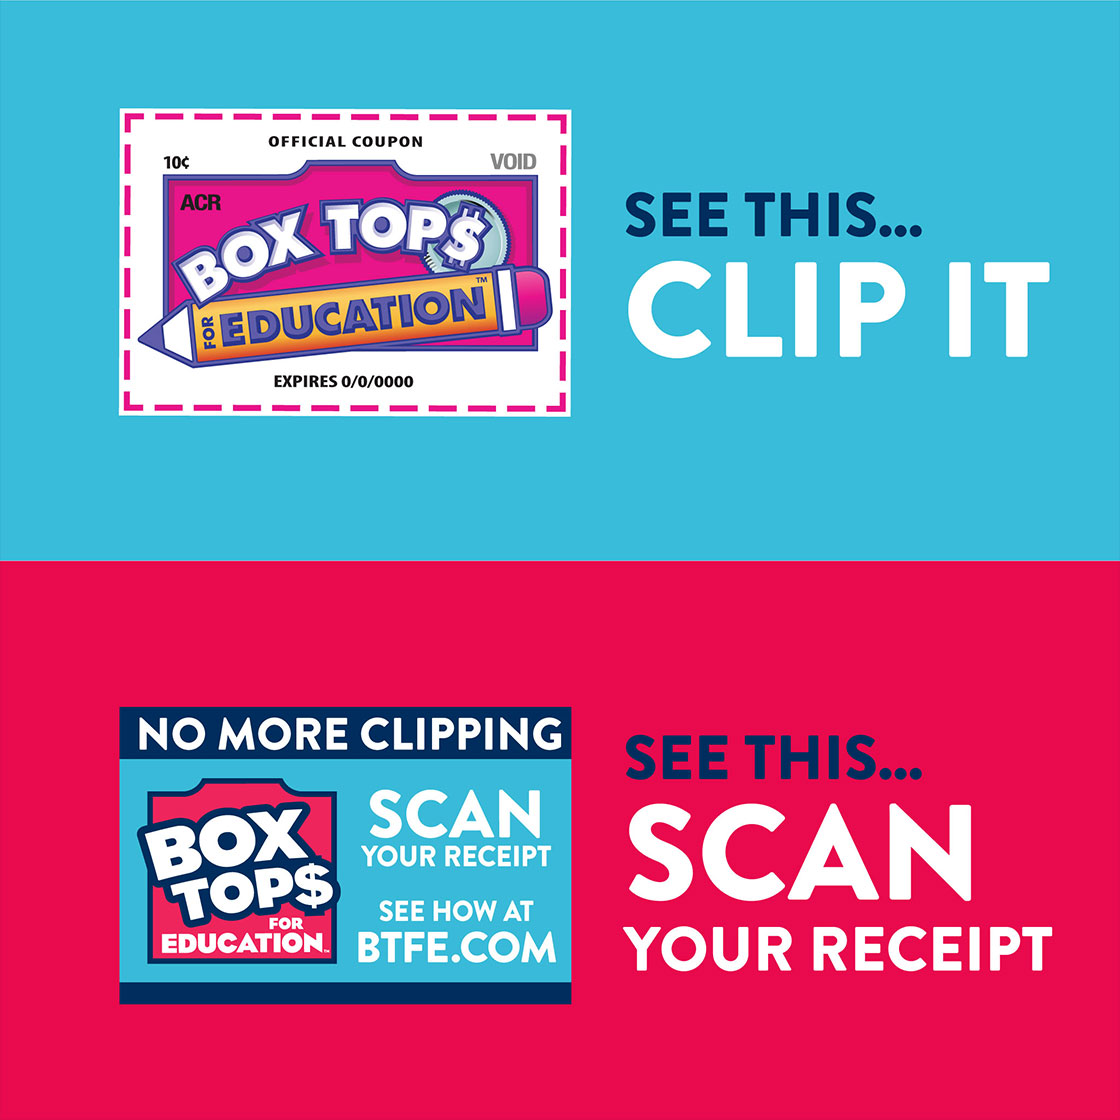 Box Tops for Education – The Magellan Charter School